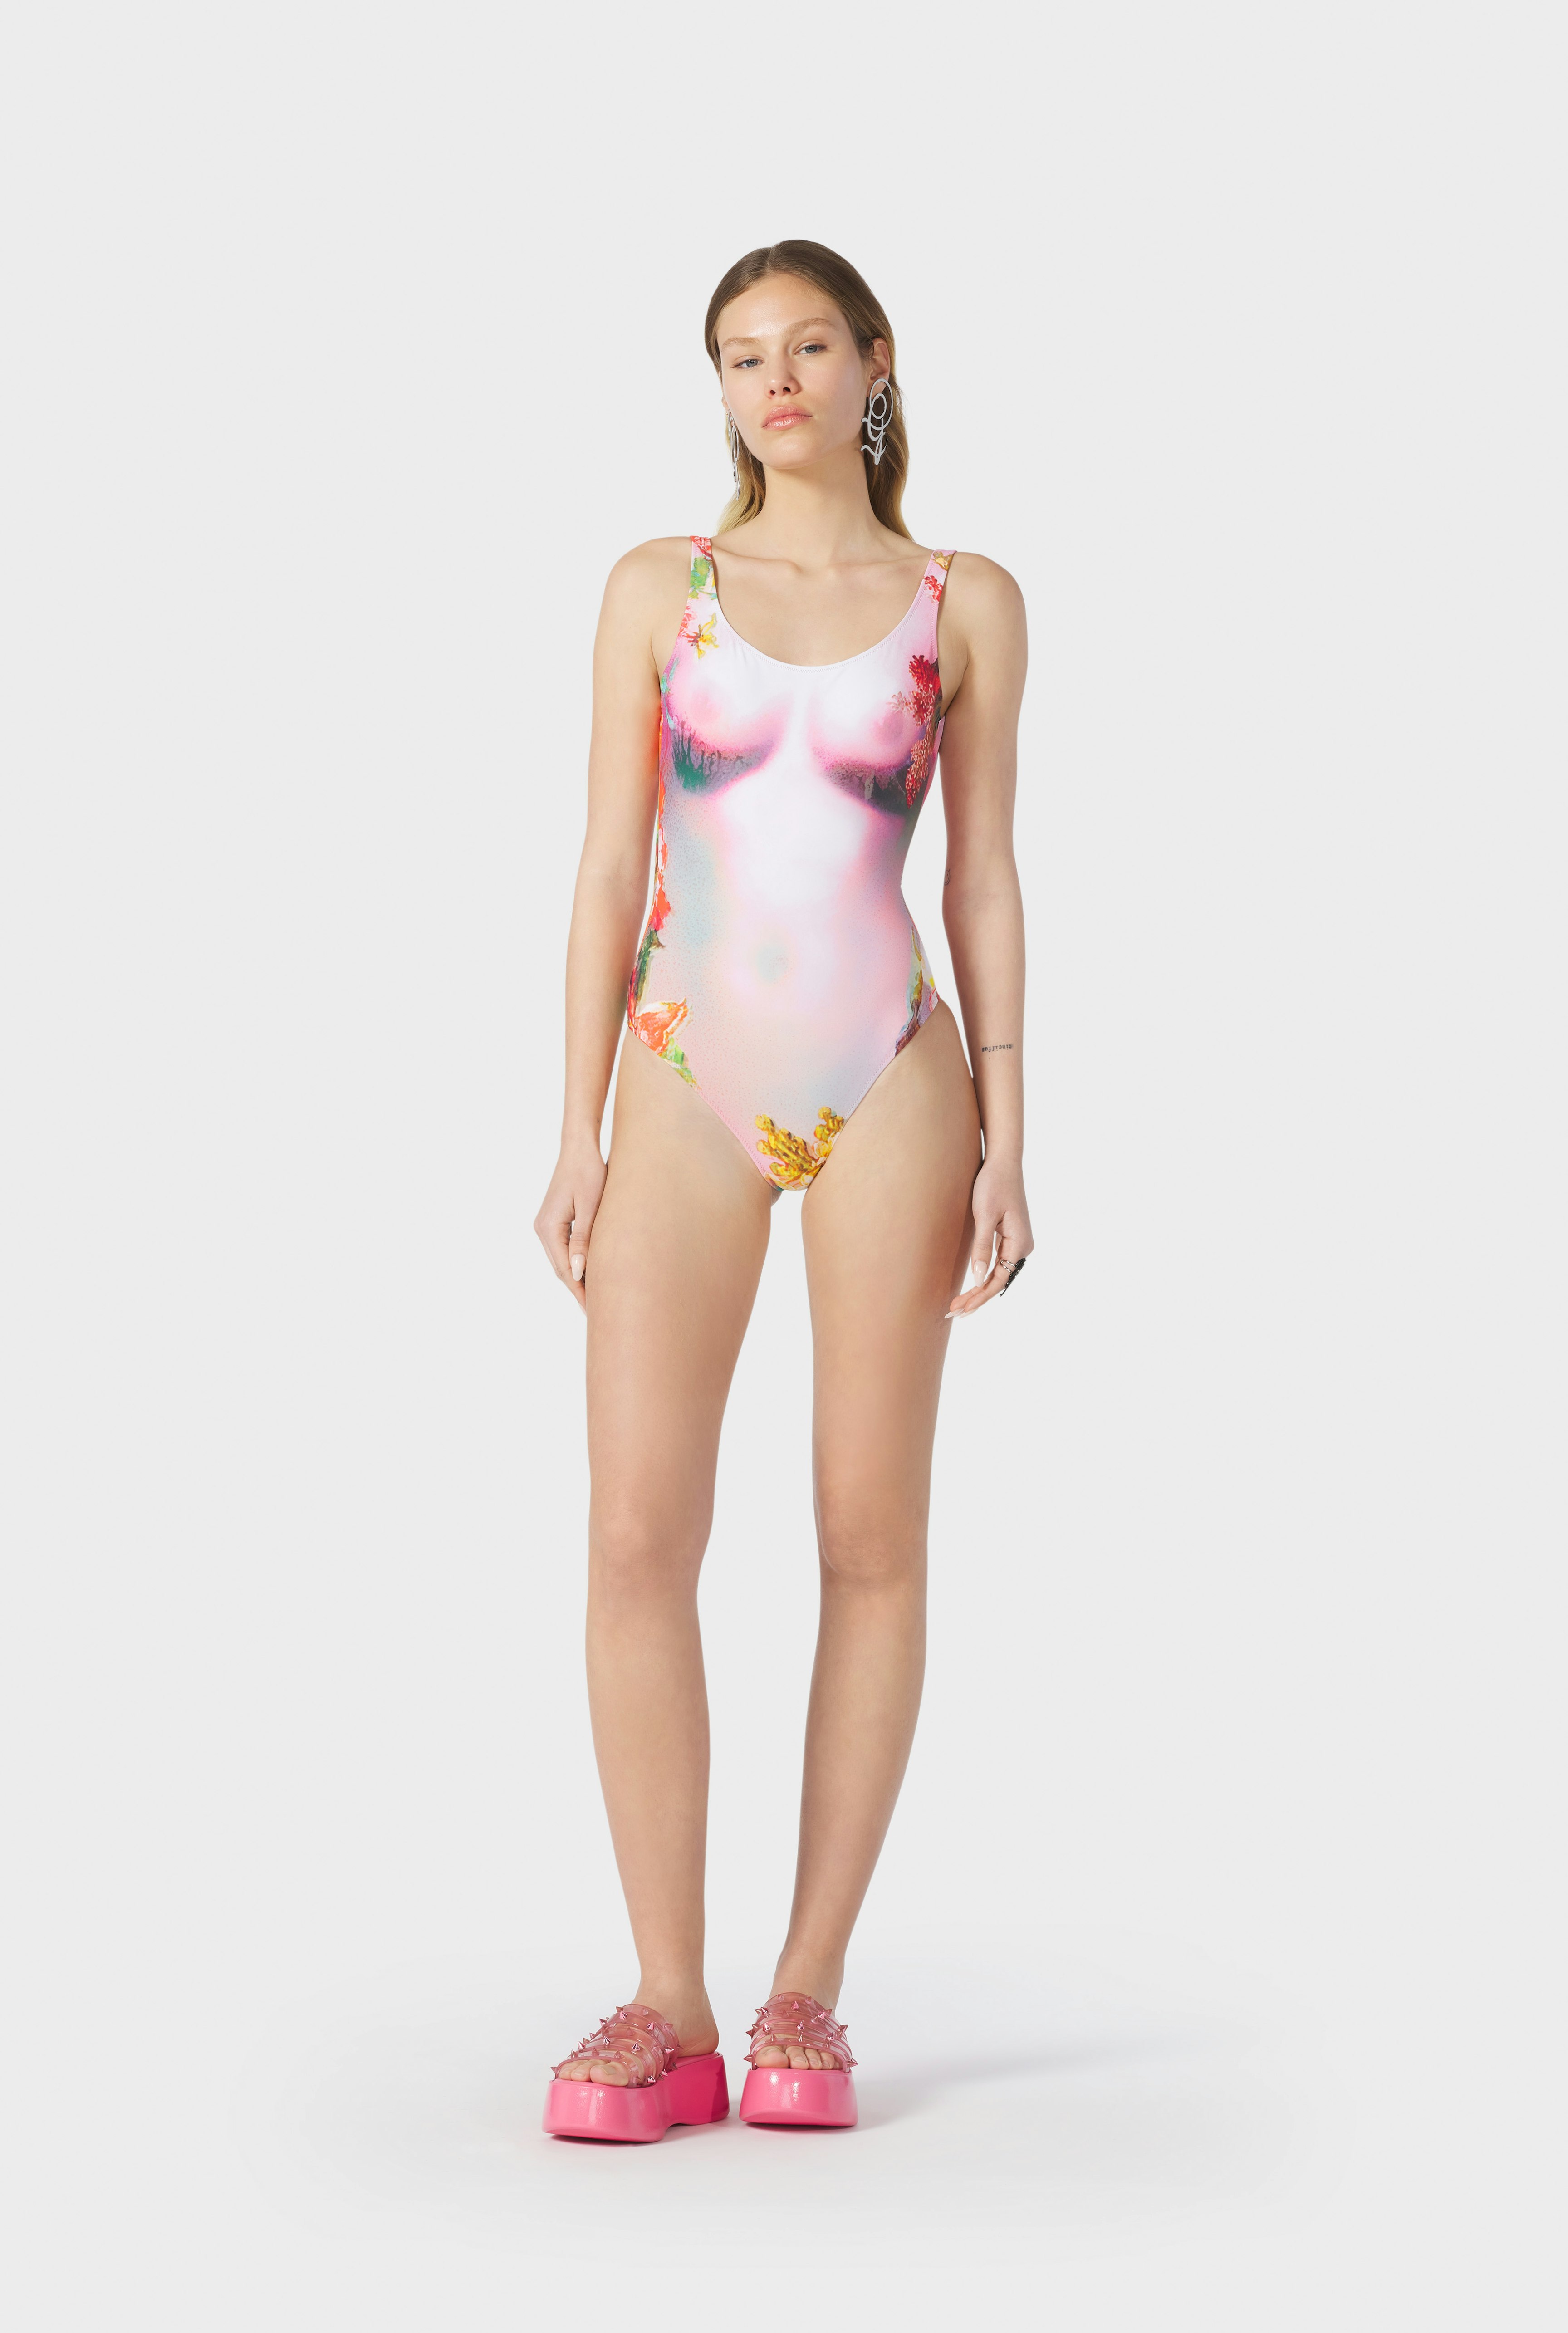 The Pink Body Flower Swimsuit